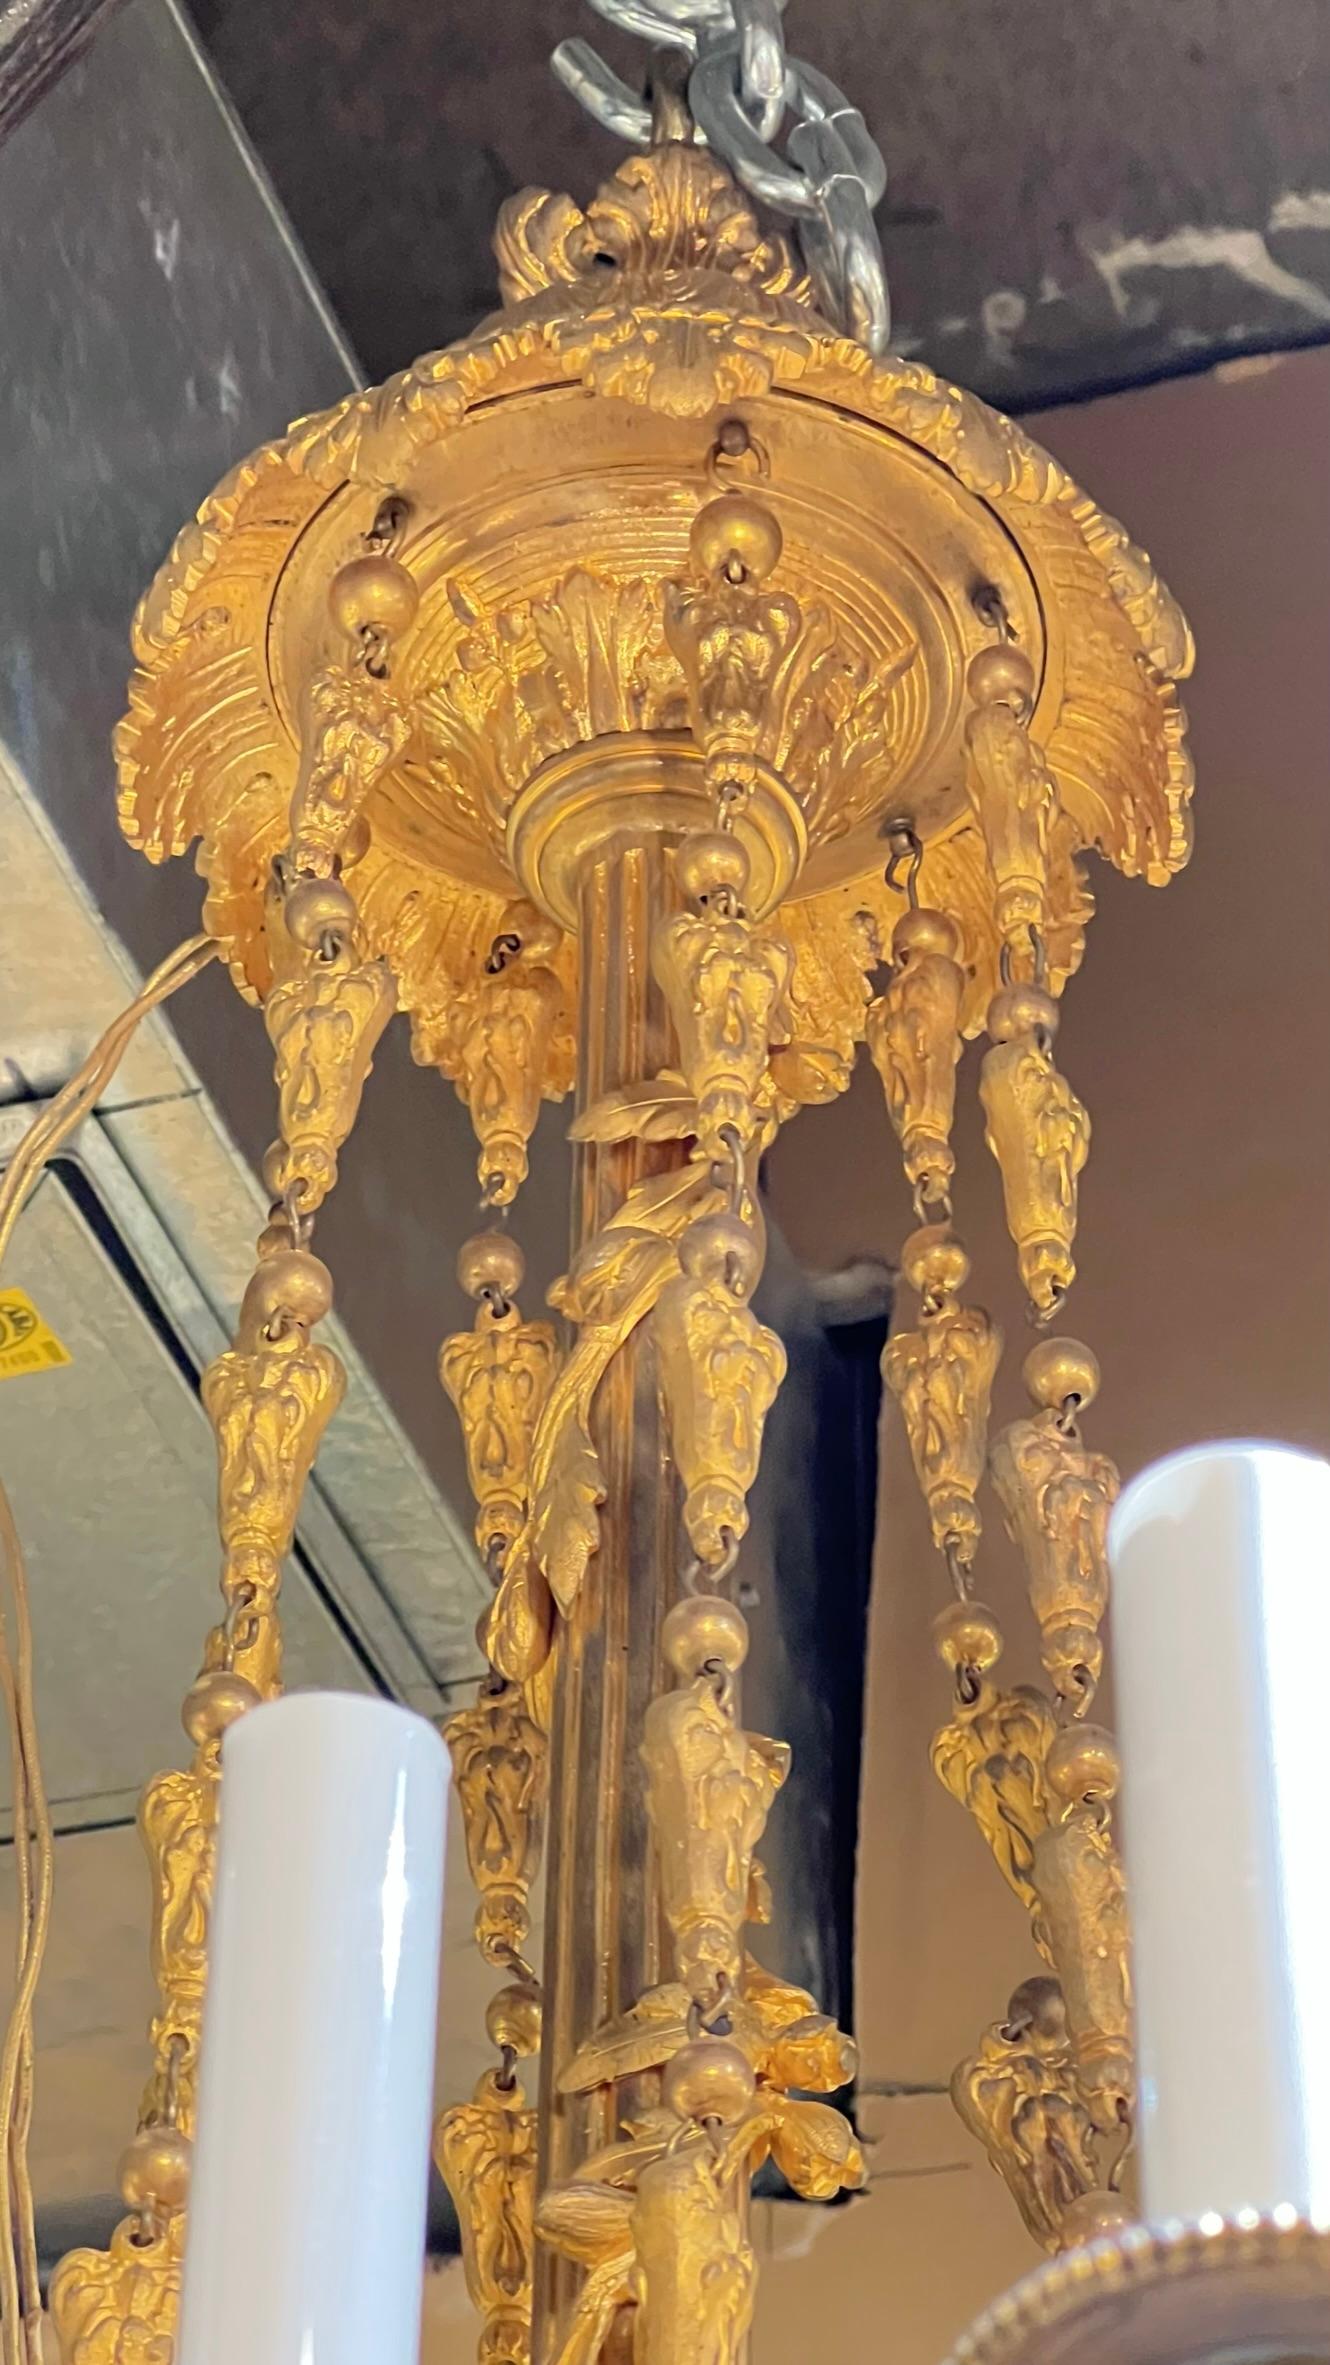 French 19th Century 18-Light Gilt Bronze Chandelier in Louis XVI Style For Sale 7